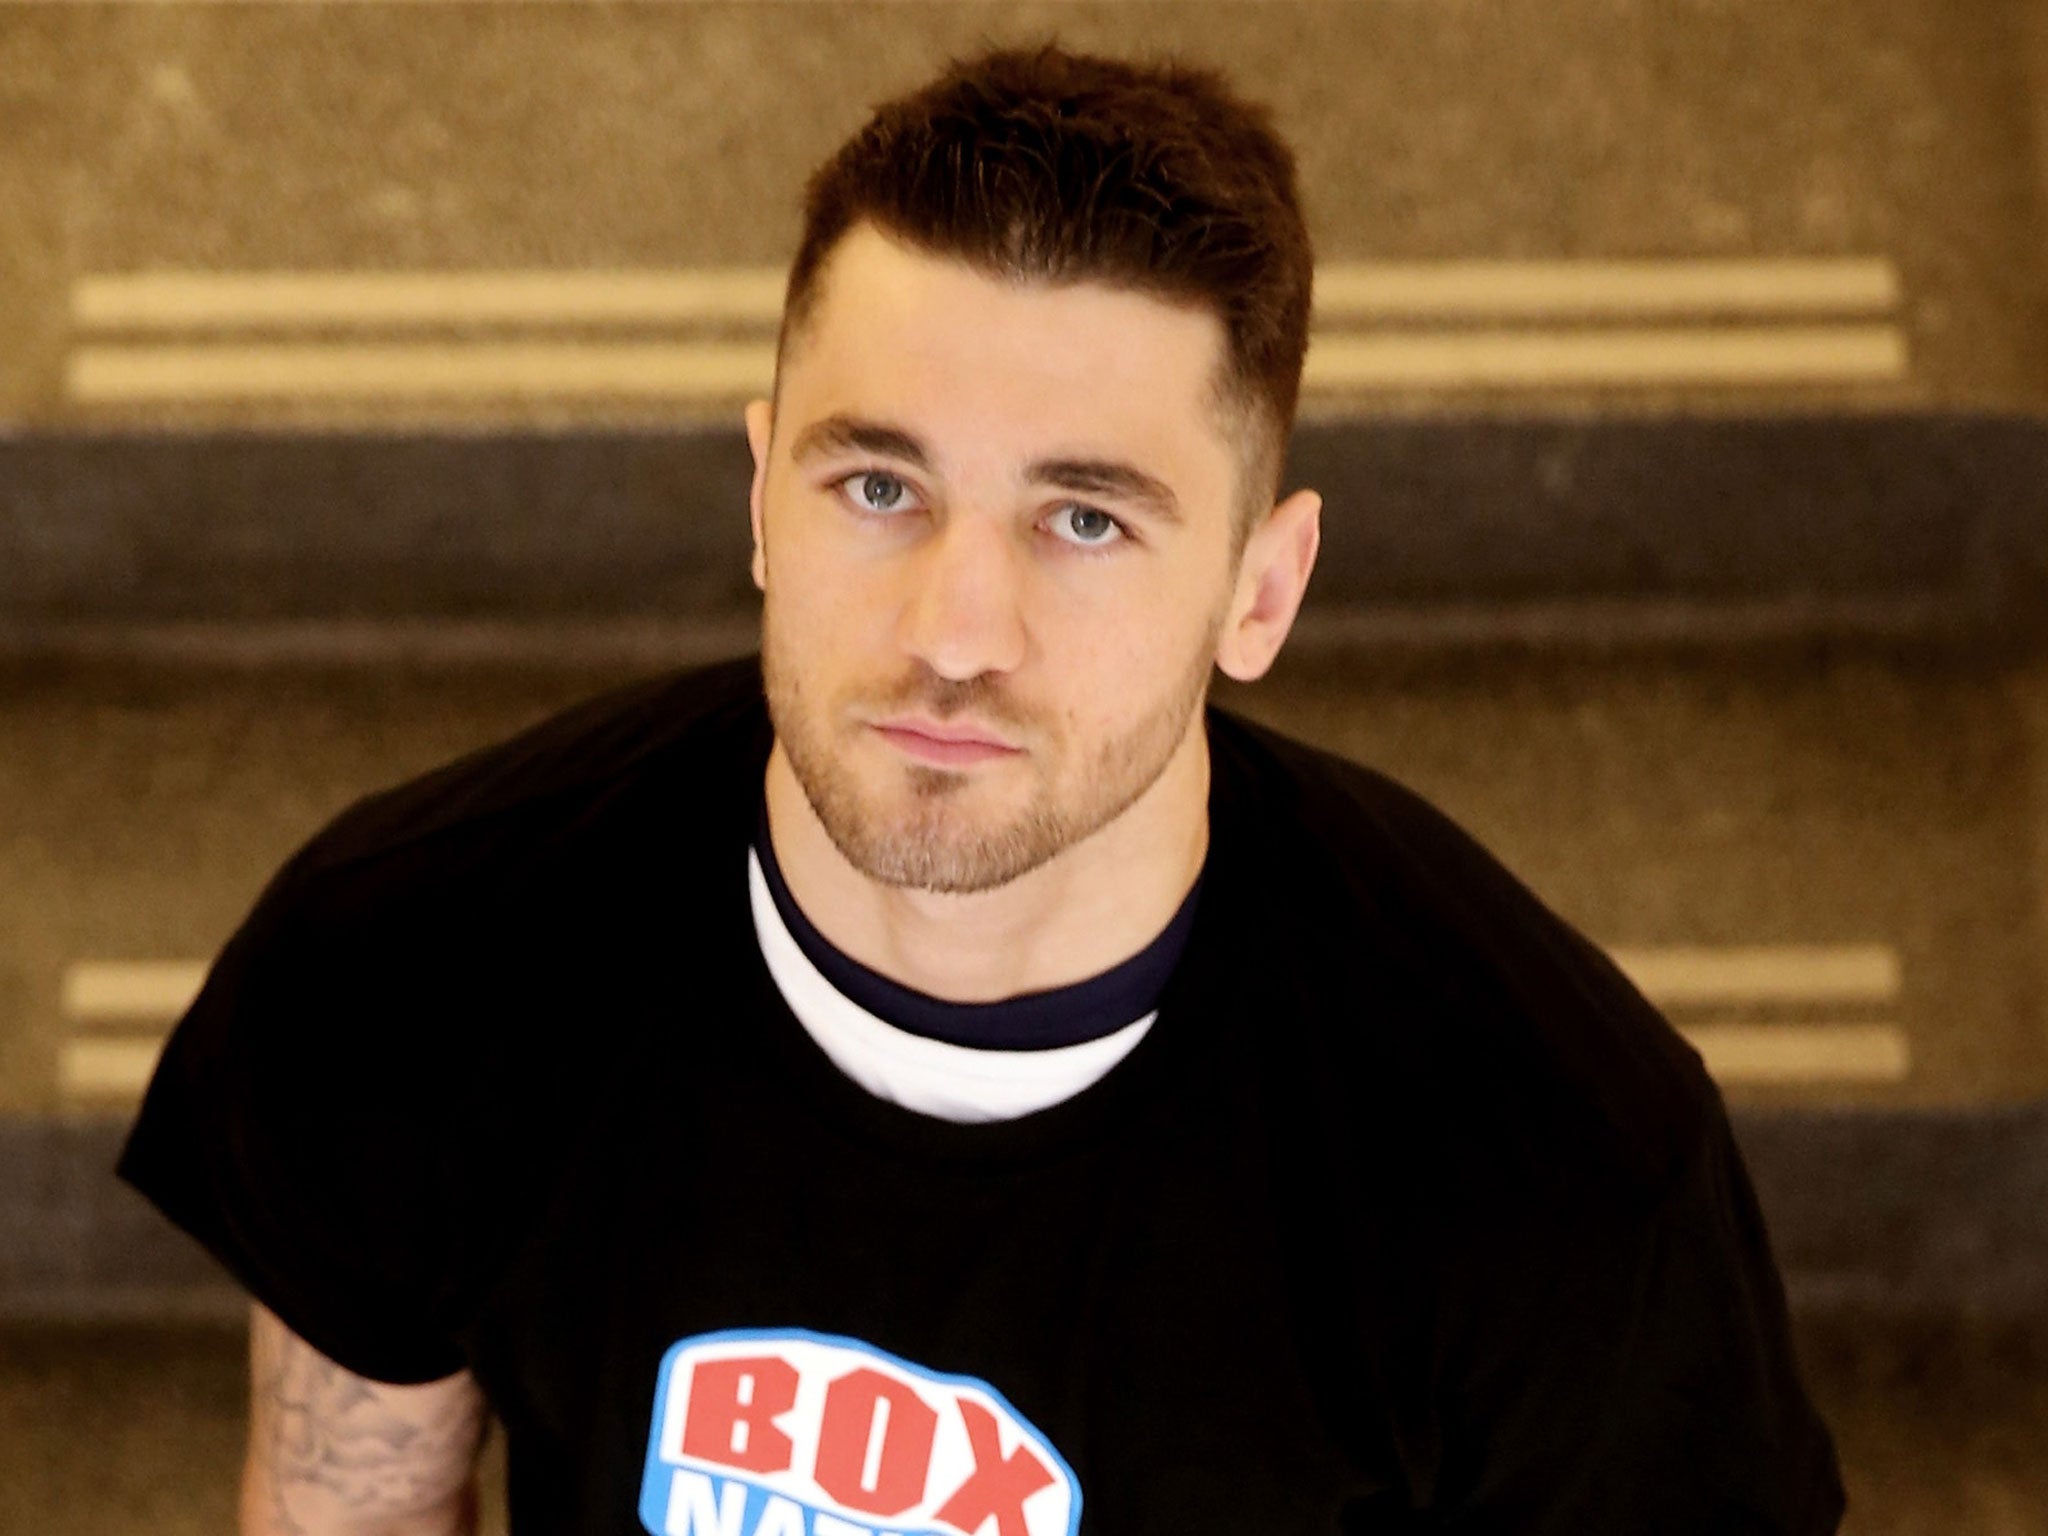 Nathan Cleverly upset Froch when he sparred Mikel Kessler, whom the Cobra beat last month